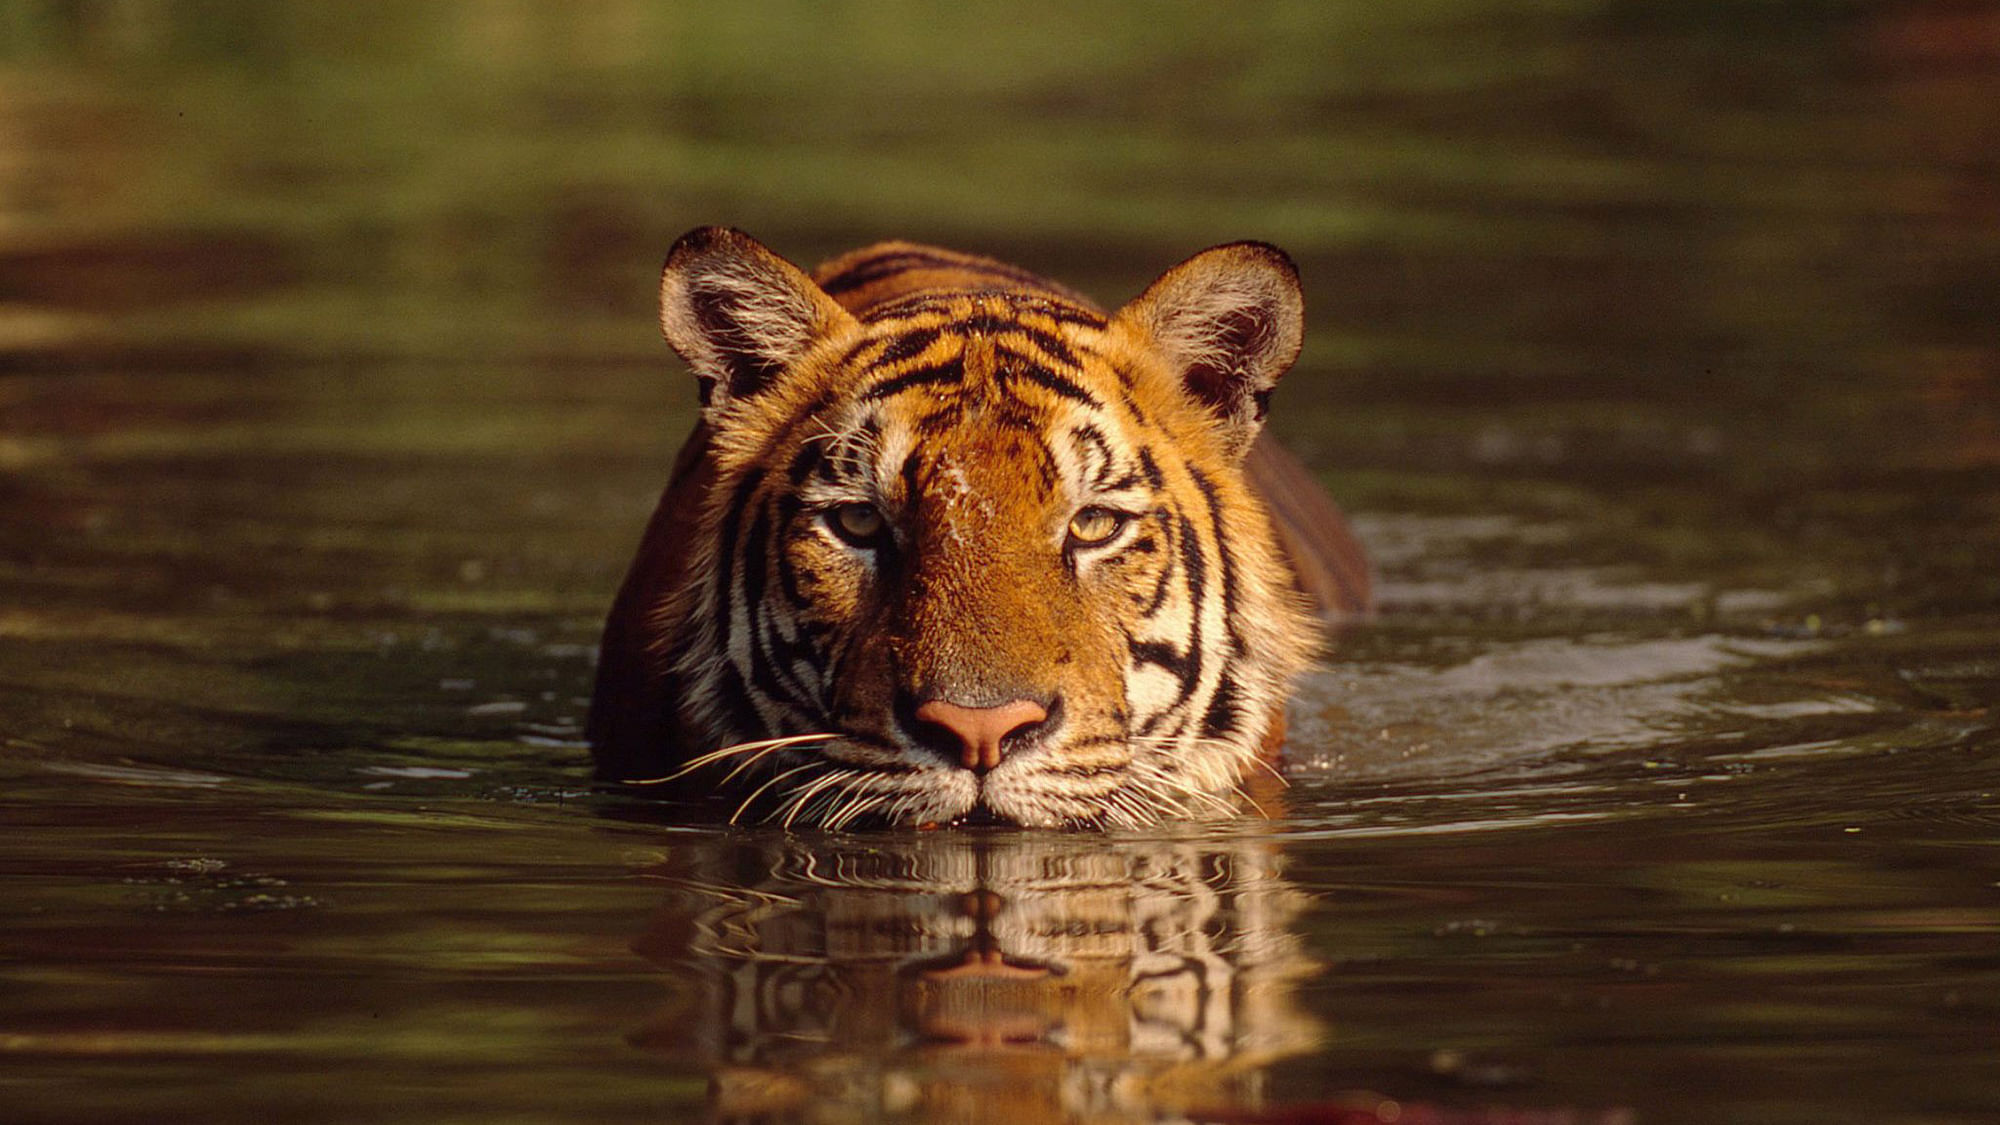 In over 900 court cases, only <a href="http://www.wpsi-india.org/tiger/poaching_crisis.php">61 persons have actually been convicted</a> of offences relating to poaching tigers.&nbsp;(Photo: iStock)